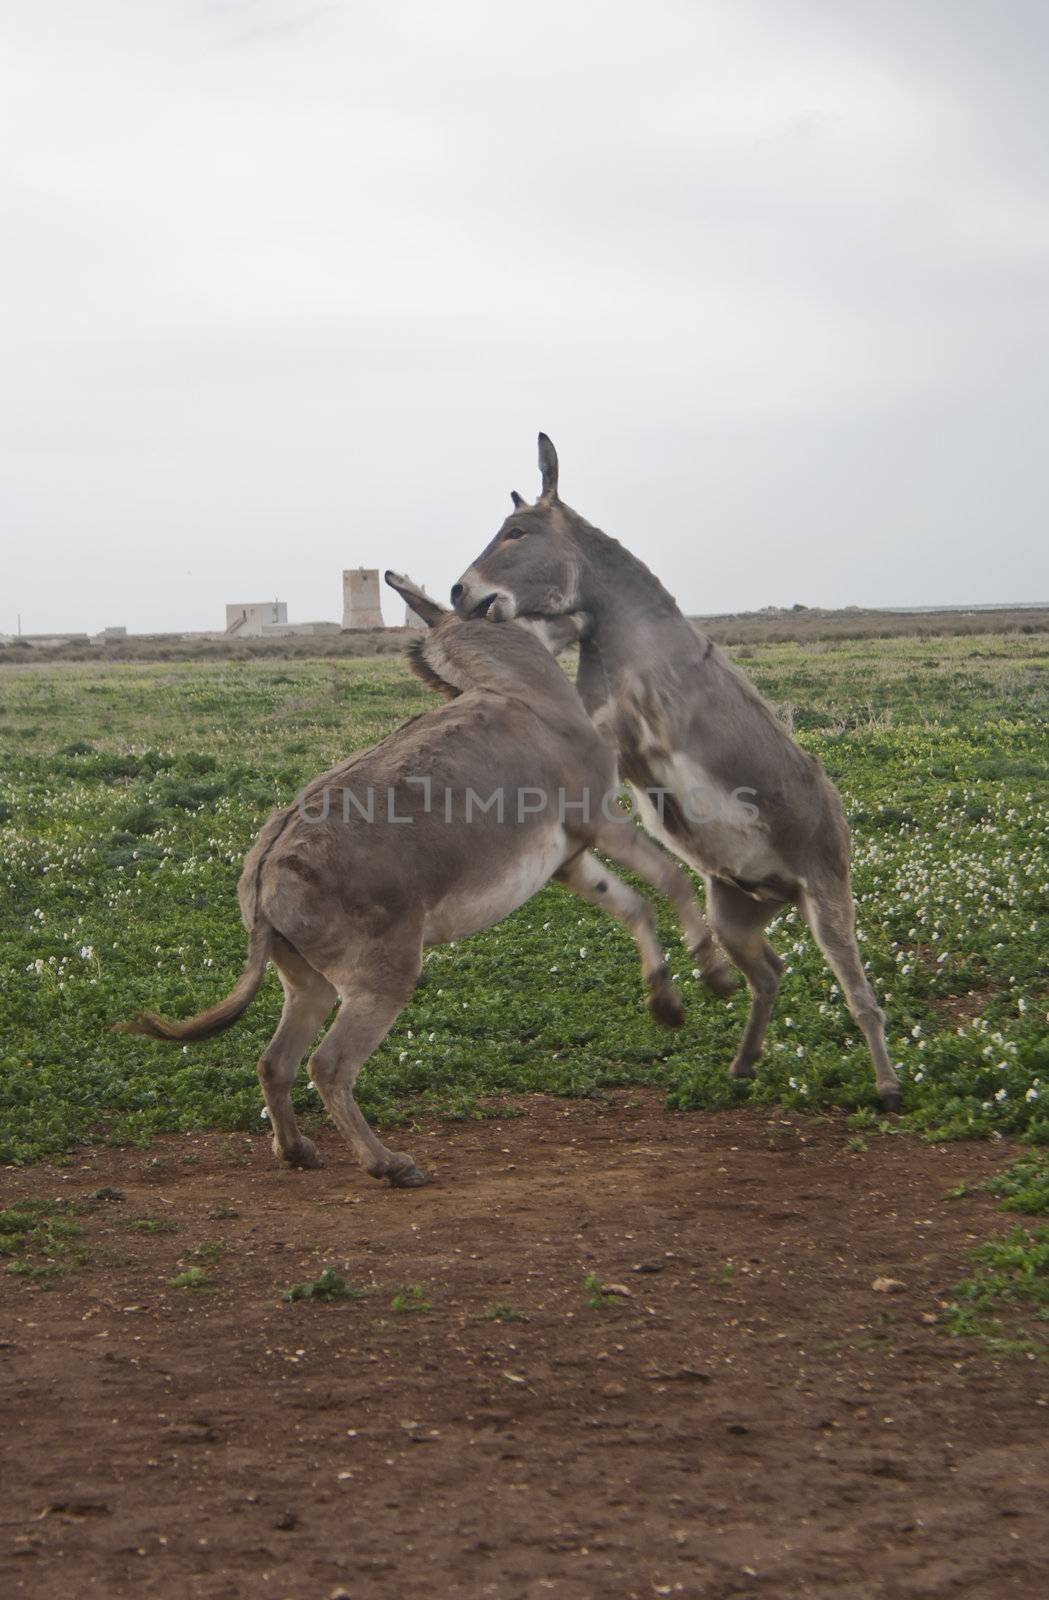 struggle between two donkeys with surrounding green